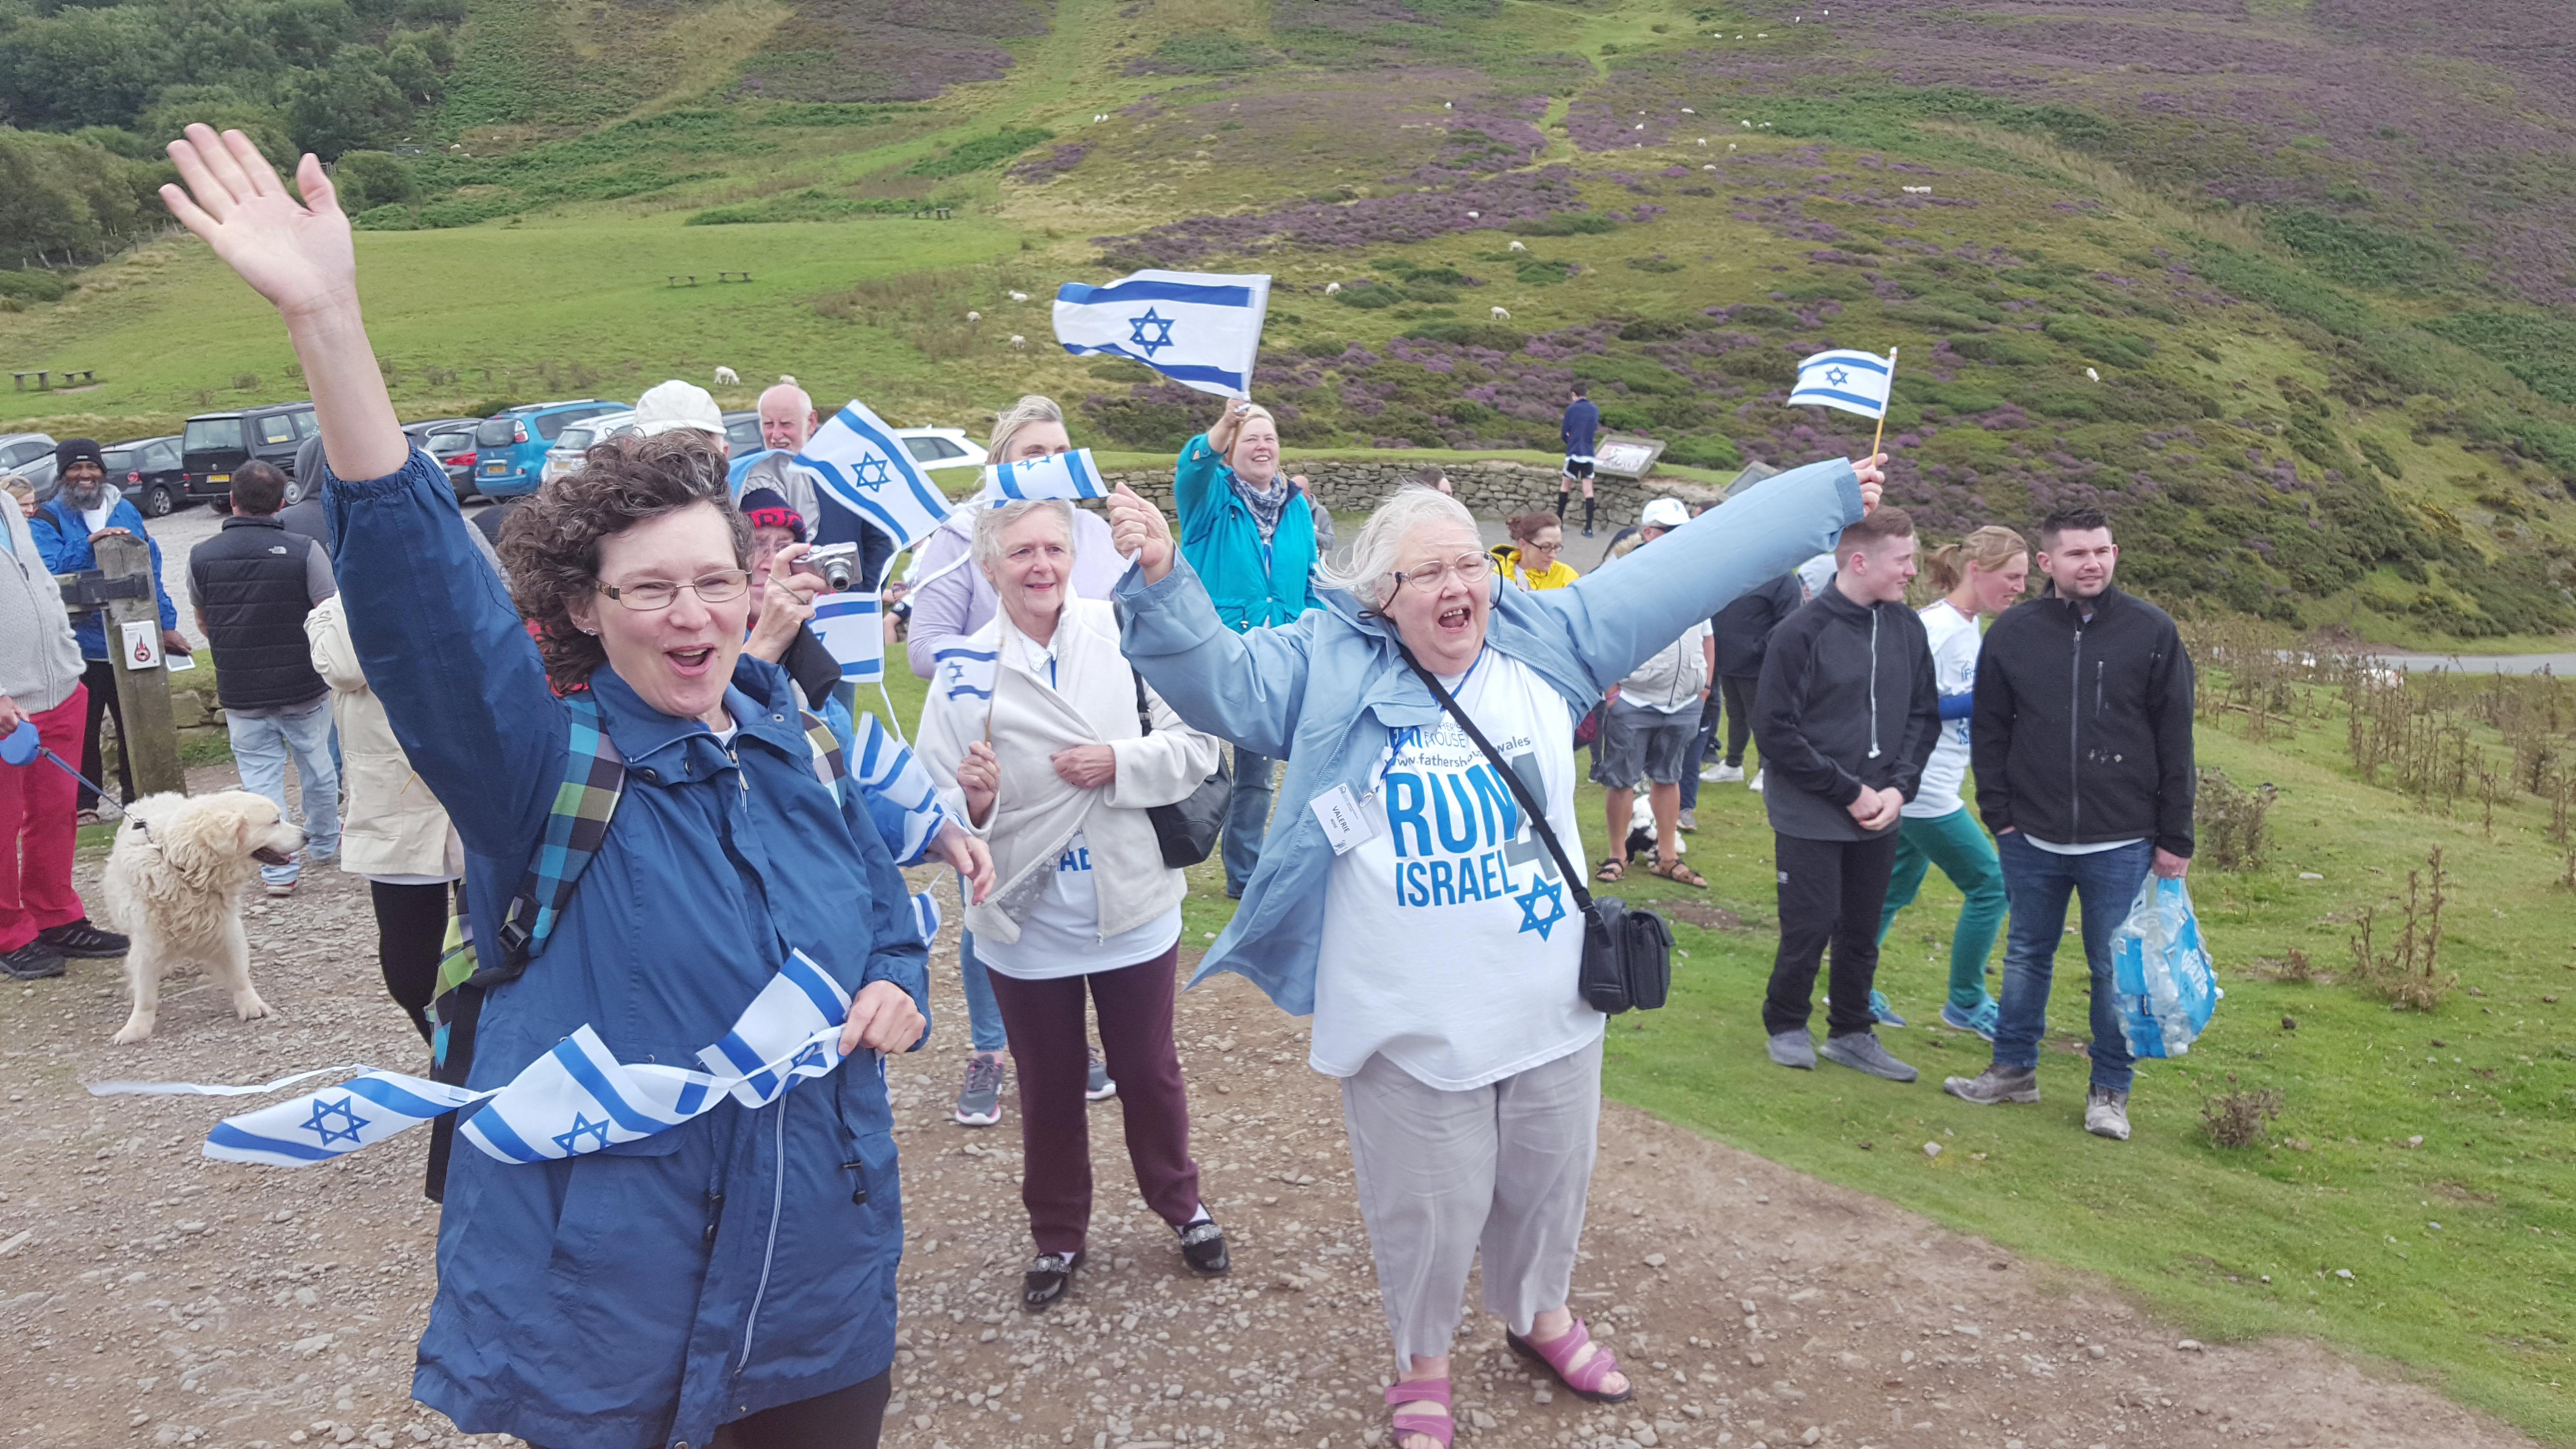 In an event organised by the Father’s House Sabbath congregation at Shotton, Deeside, cheerleaders greet 80 intrepid runners as they complete 8km along the Clwydian range in North Wales to demonstrate Christian support for Israel